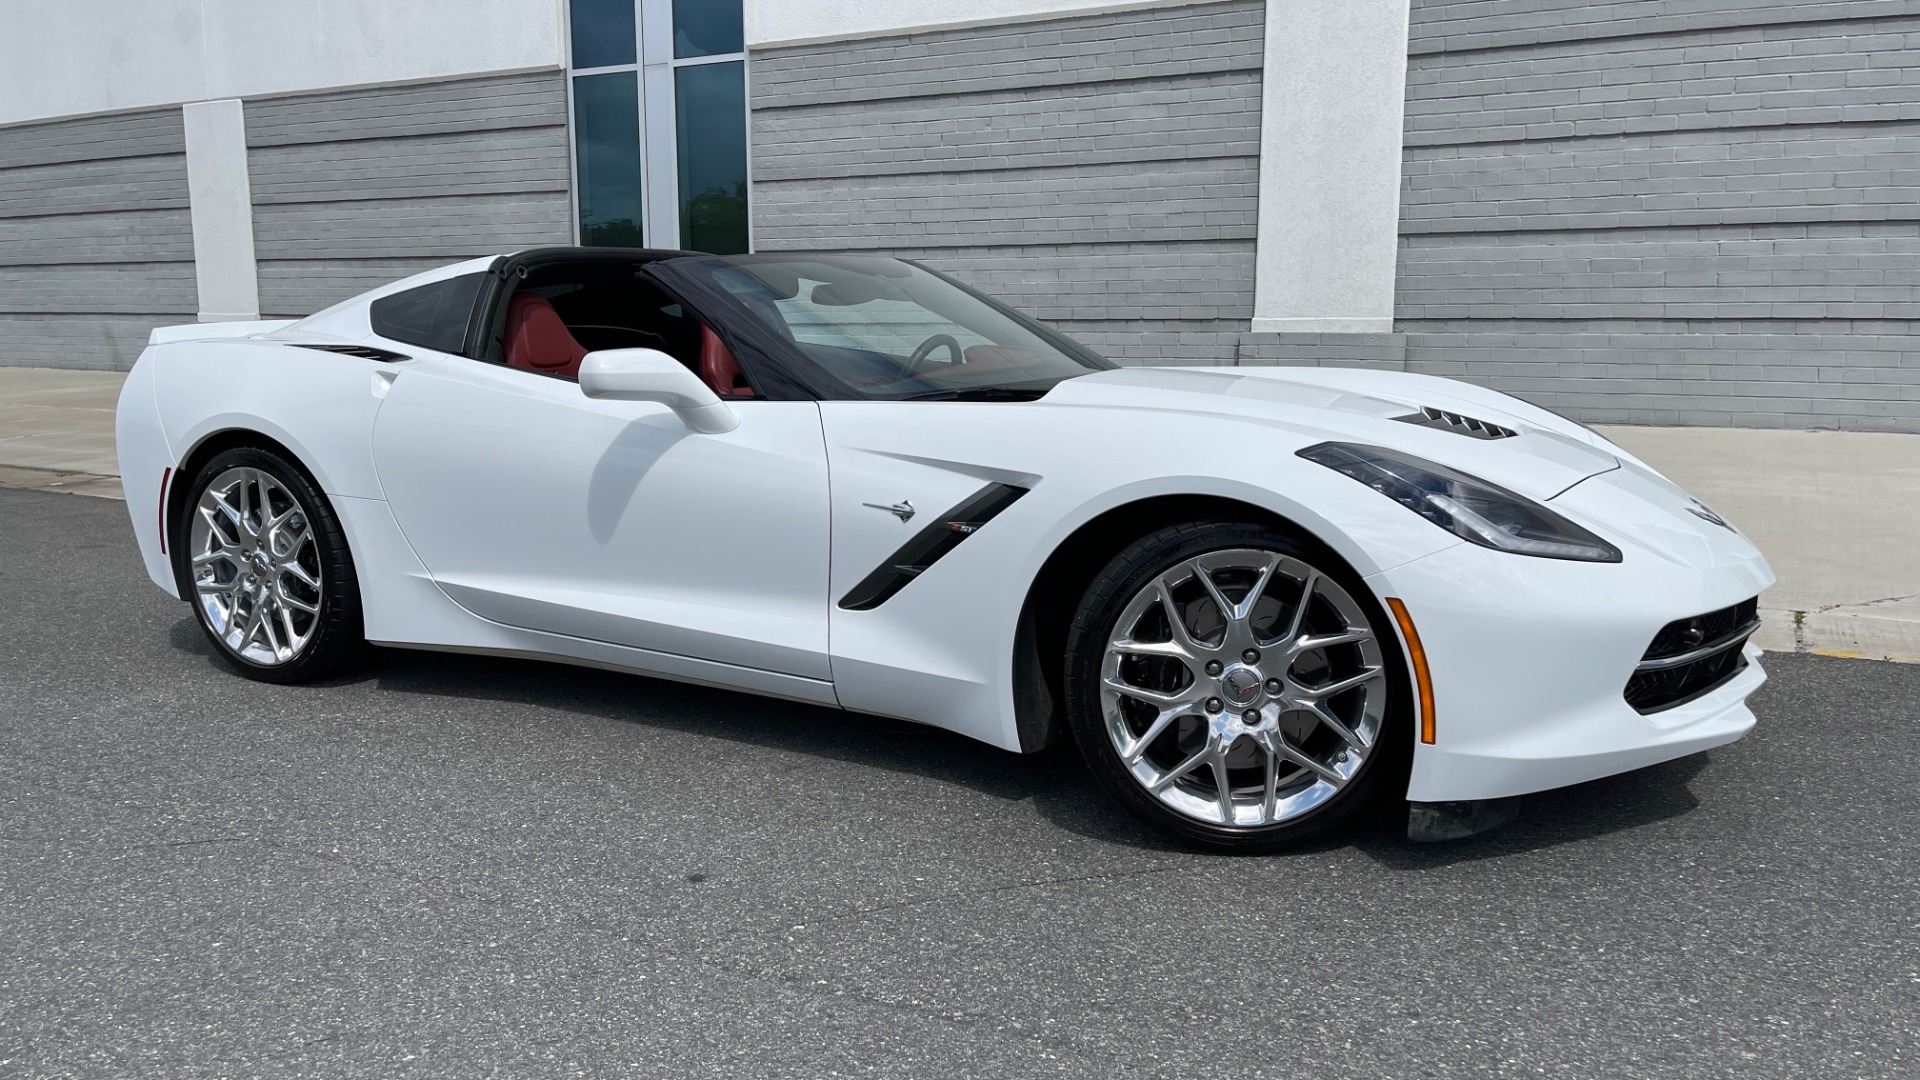 Used 2016 Chevrolet CORVETTE C7 STINGRAY COUPE Z51 3LT / NAV / PERF TRACTION MGMT / REARVIEW for sale Sold at Formula Imports in Charlotte NC 28227 2